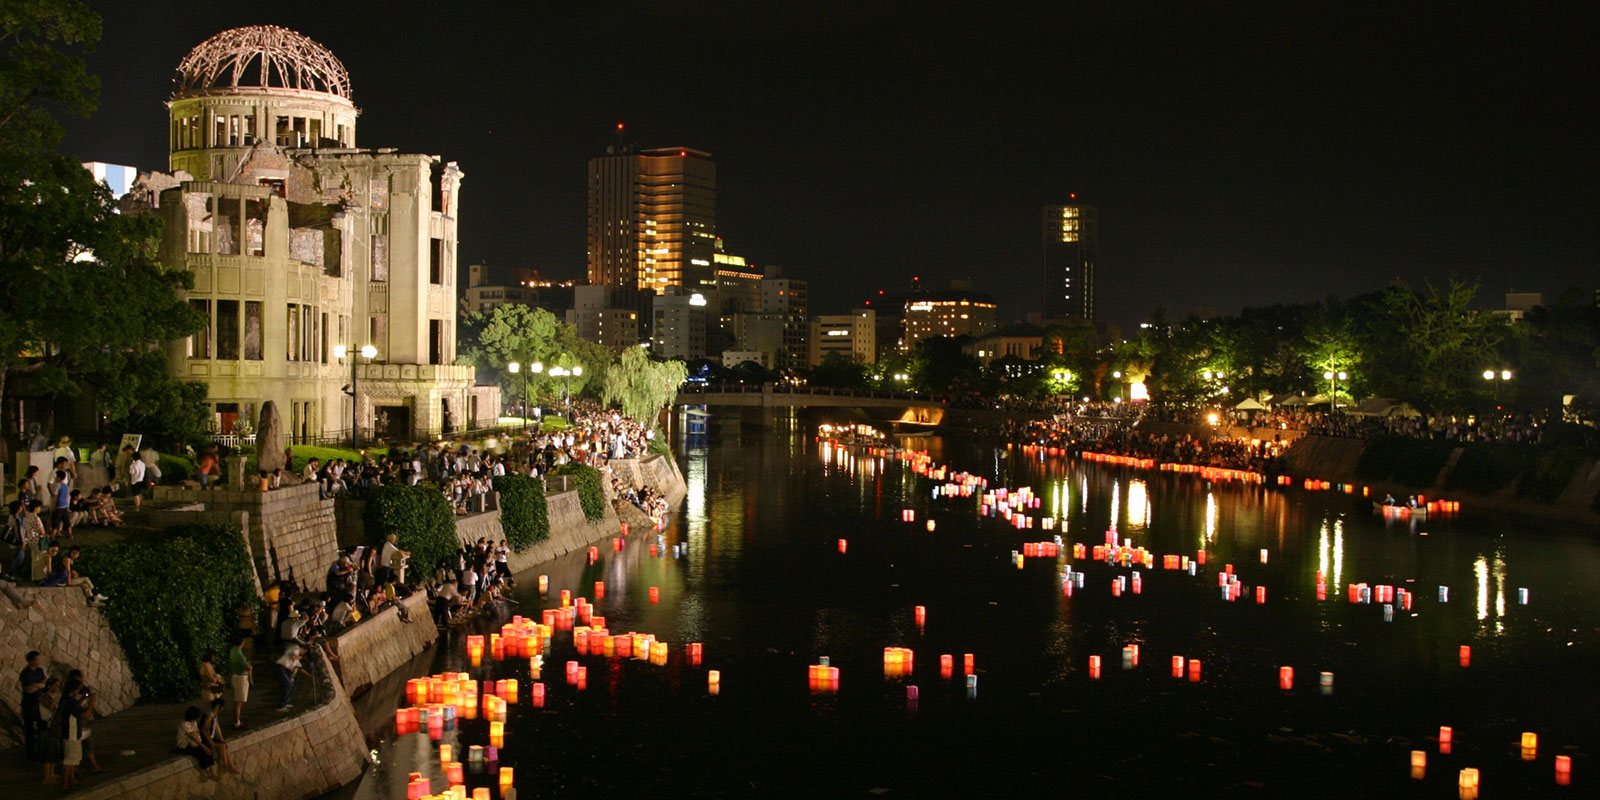 A ceremony marks the anniversary of the Hiroshima bombing every August | JNR-TAMA/PIXTA